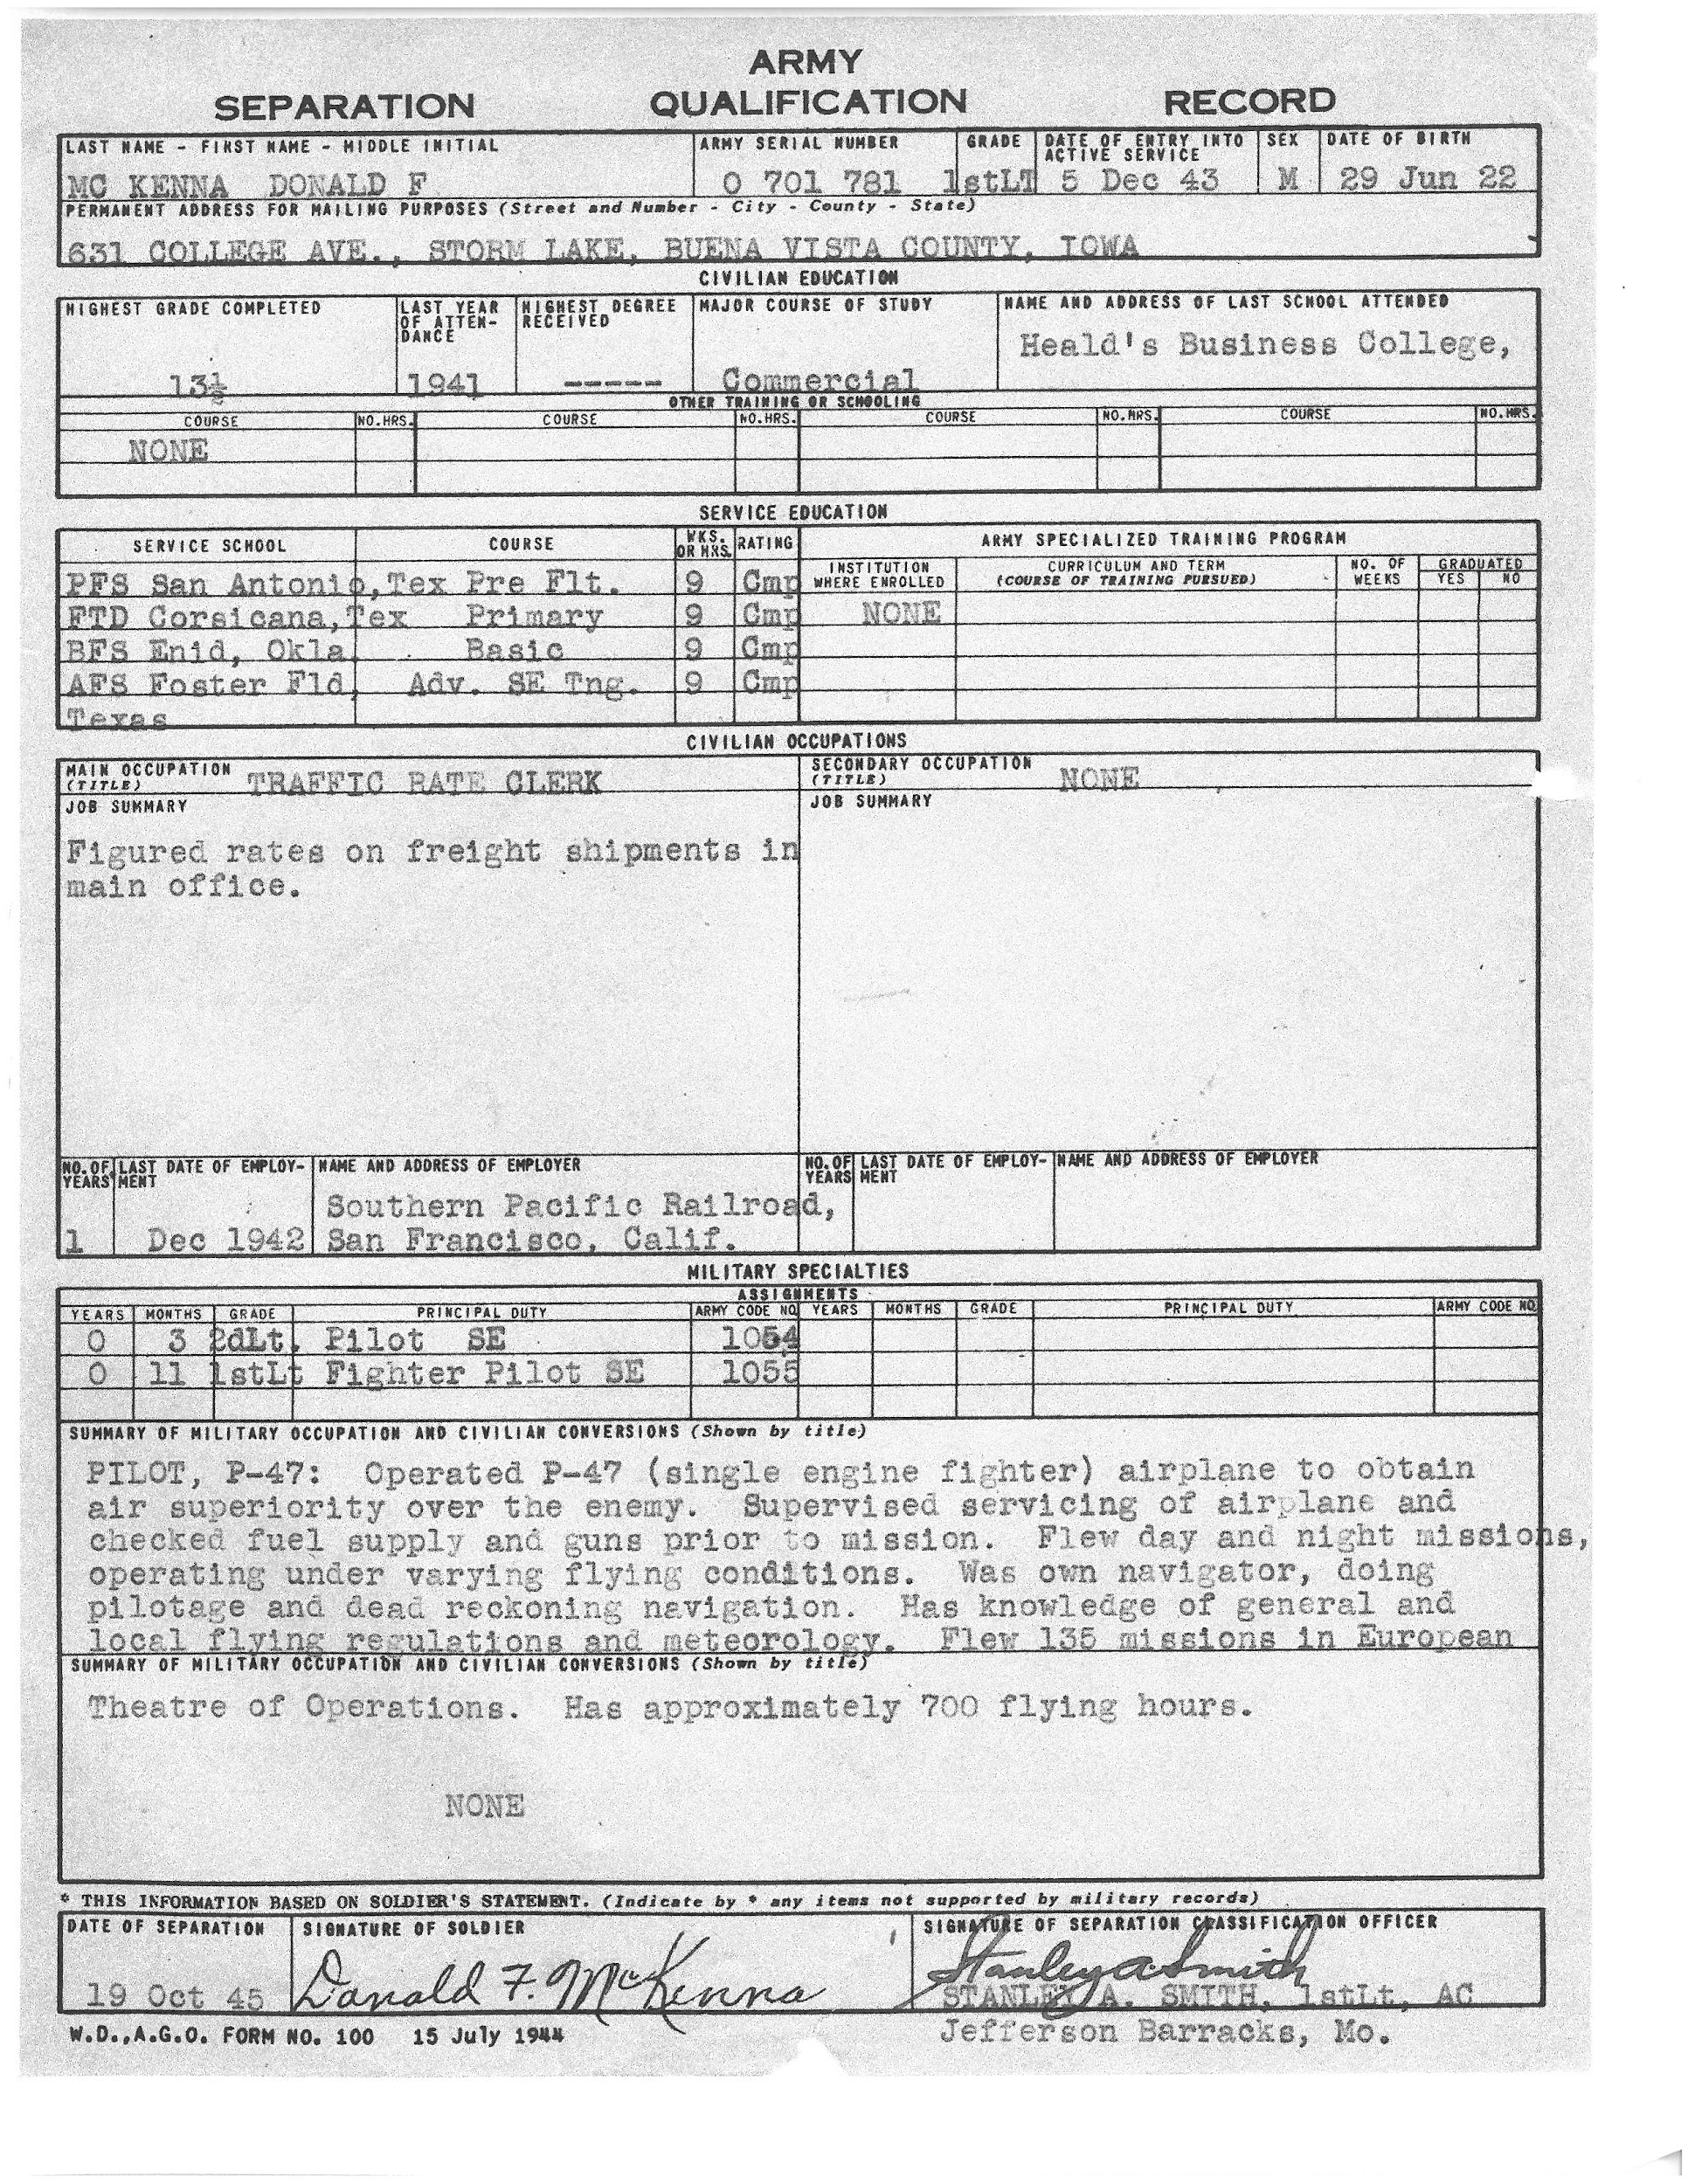 Donald McKenna’s official Army Separation Qualification Record, Photo courtesy of Dan Sokolowski